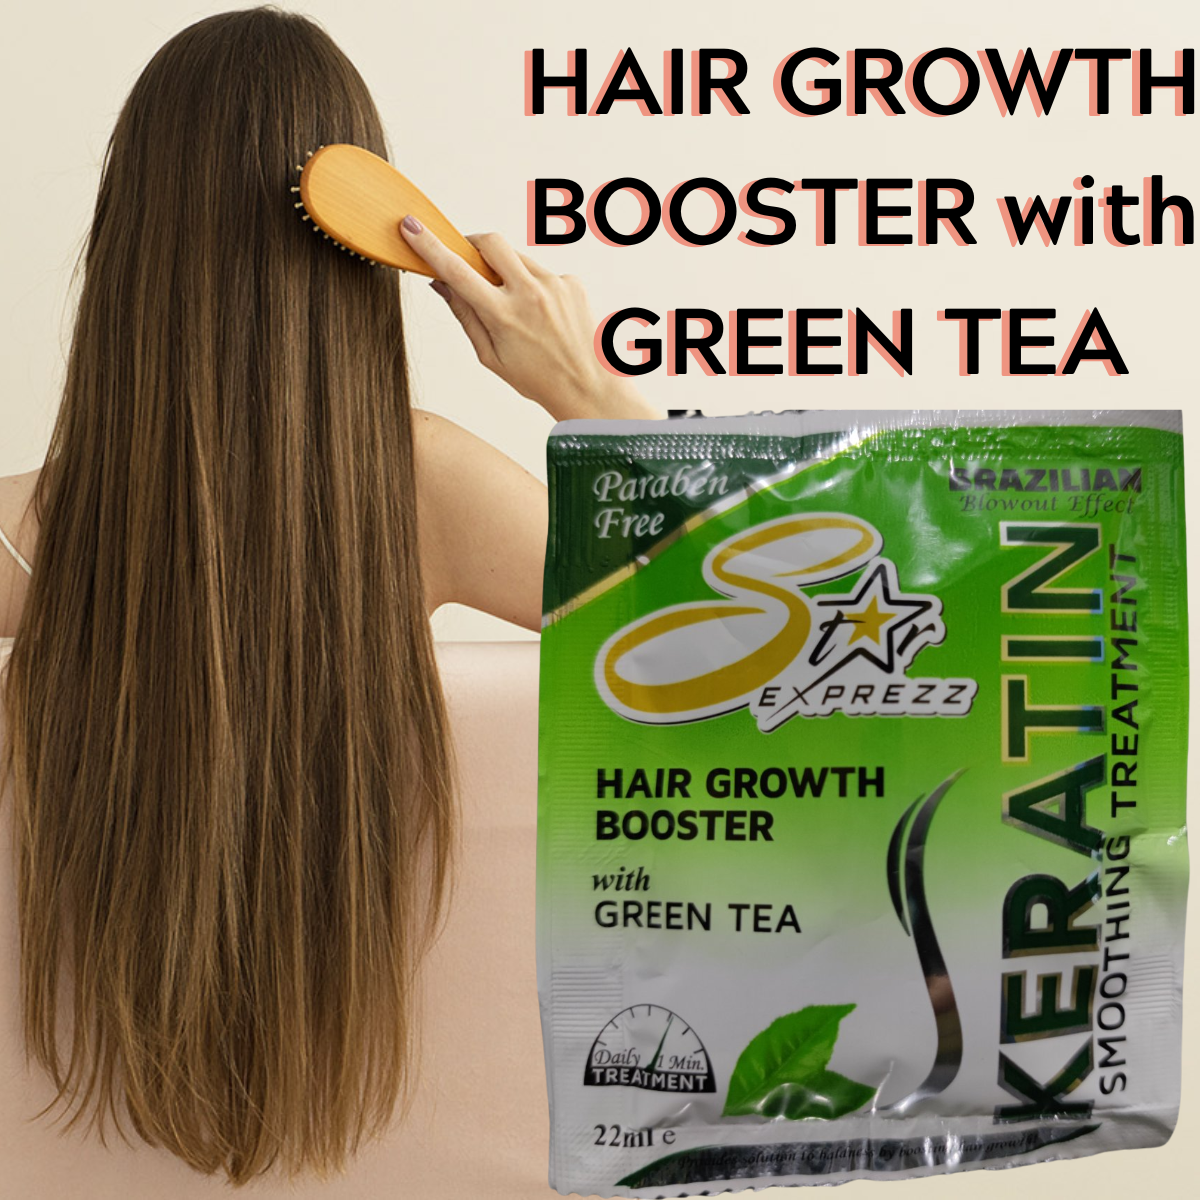 BEST STAR EXPREZZ KERATIN SMOOTHING TREATMENT 22ML HAIR GROWTH BOOSTER WITH GREEN  TEA BRAZILIAN BLOWOUT EFFECT PARABEN FREE SOLUTION TO BALDNESS BY BOOSTING HAIR  GROWTH BEAUTIFUL SOFT SHINY HEALTHY STRAIGHT FRIZZ FREE